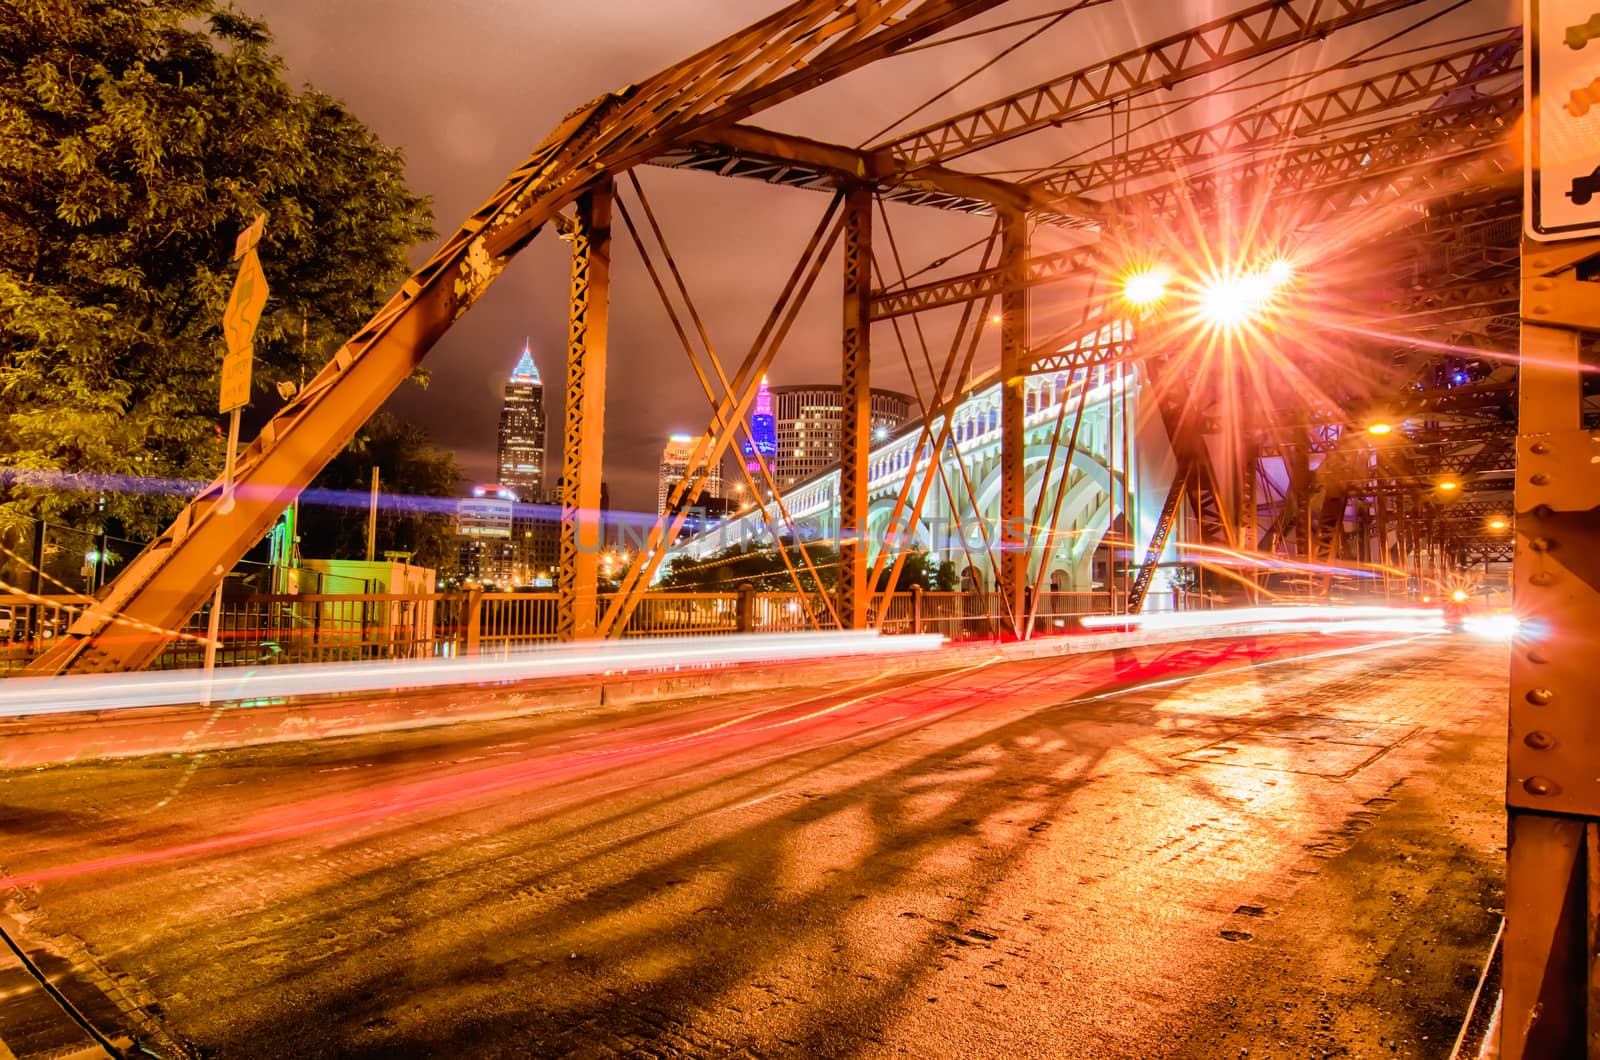 Cleveland. Image of Cleveland downtown at night by digidreamgrafix